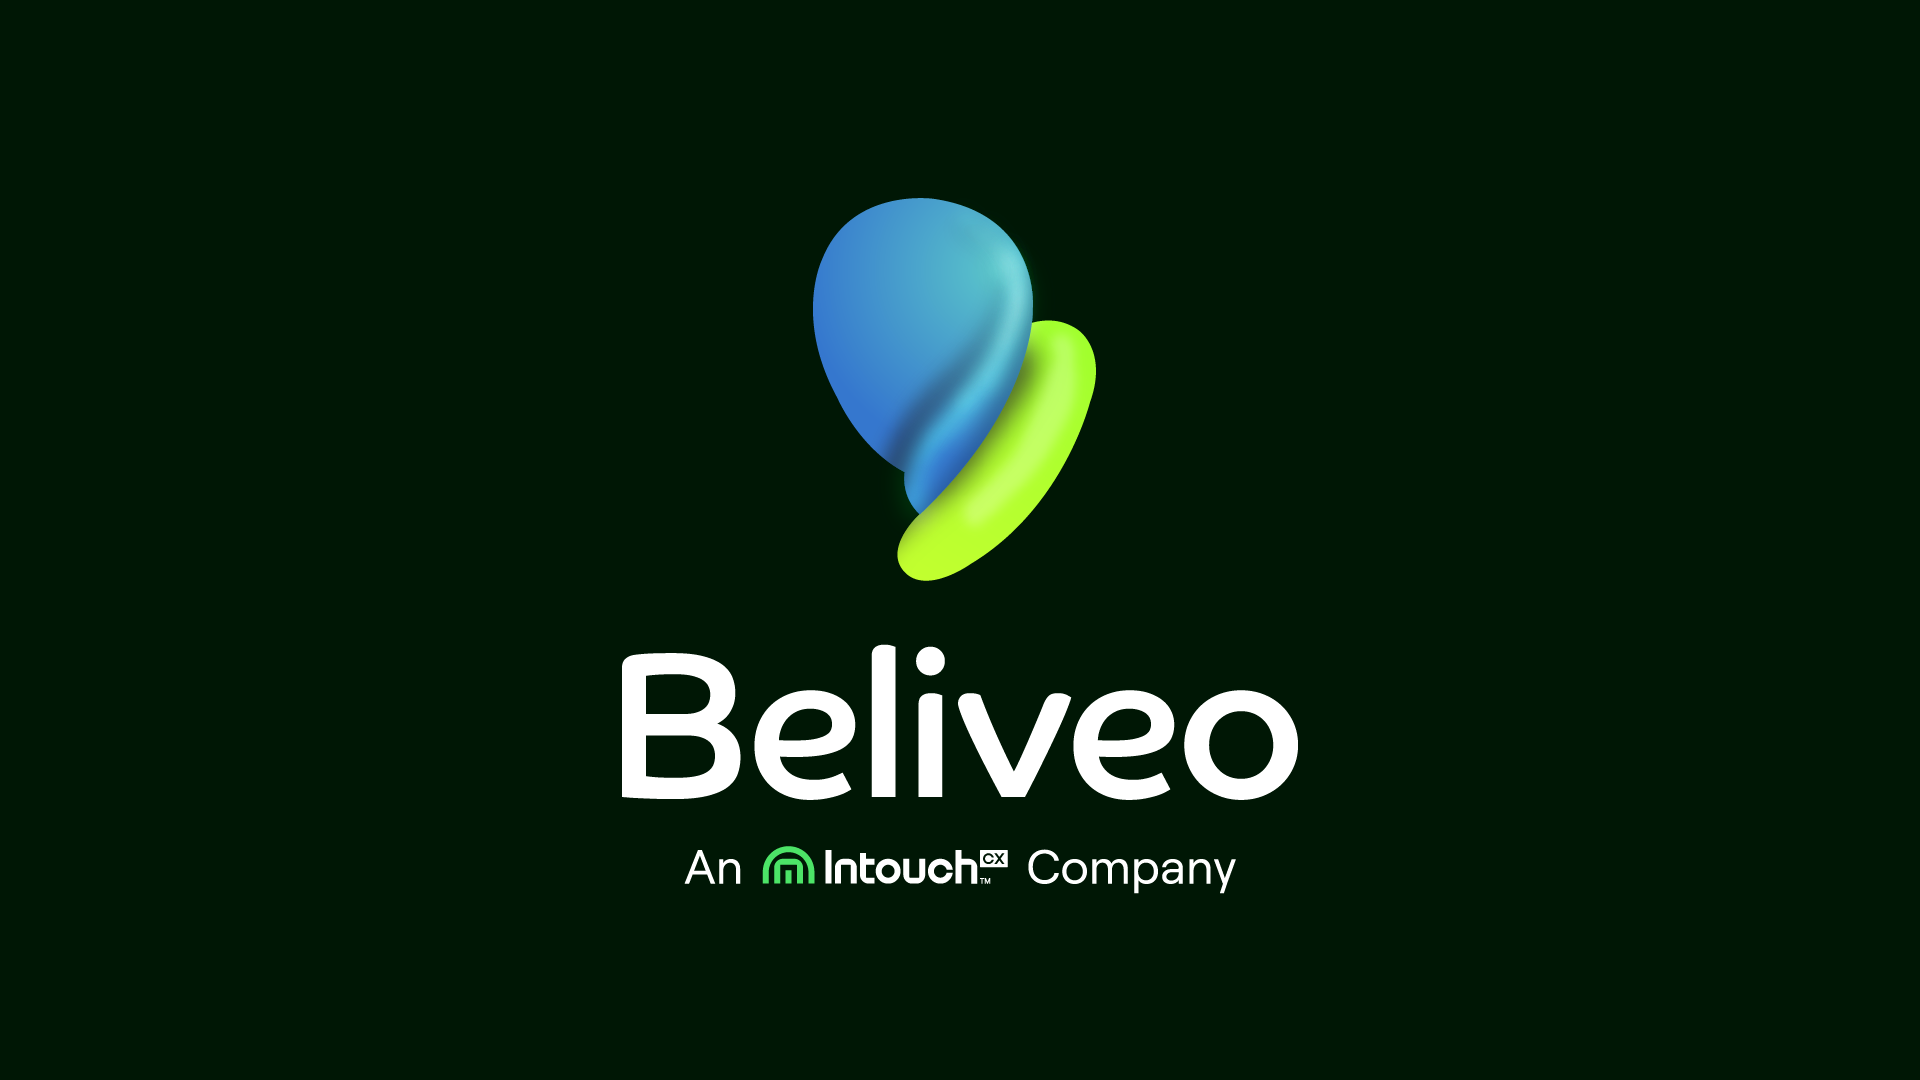 Press Release Image of Beliveo Acquisition